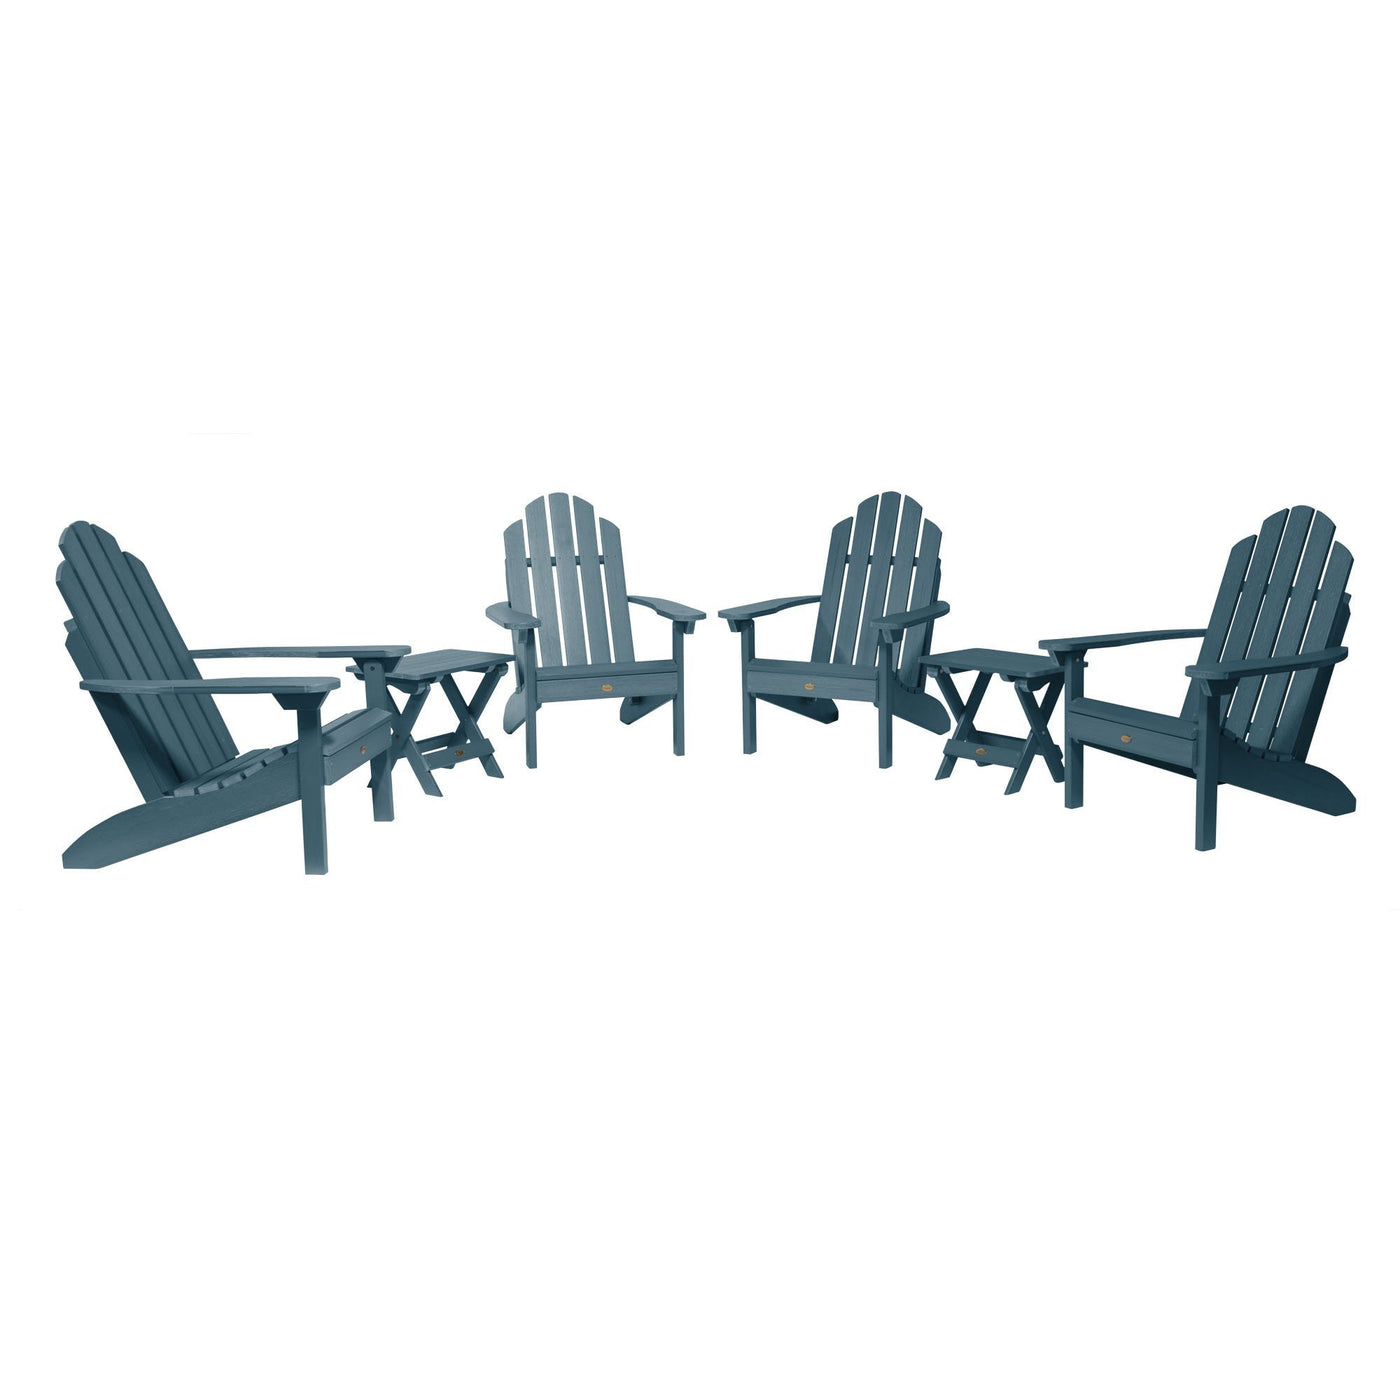 4 Classic Westport Adirondack Chairs with 2 Folding Side Tables Highwood USA Nantucket Blue 